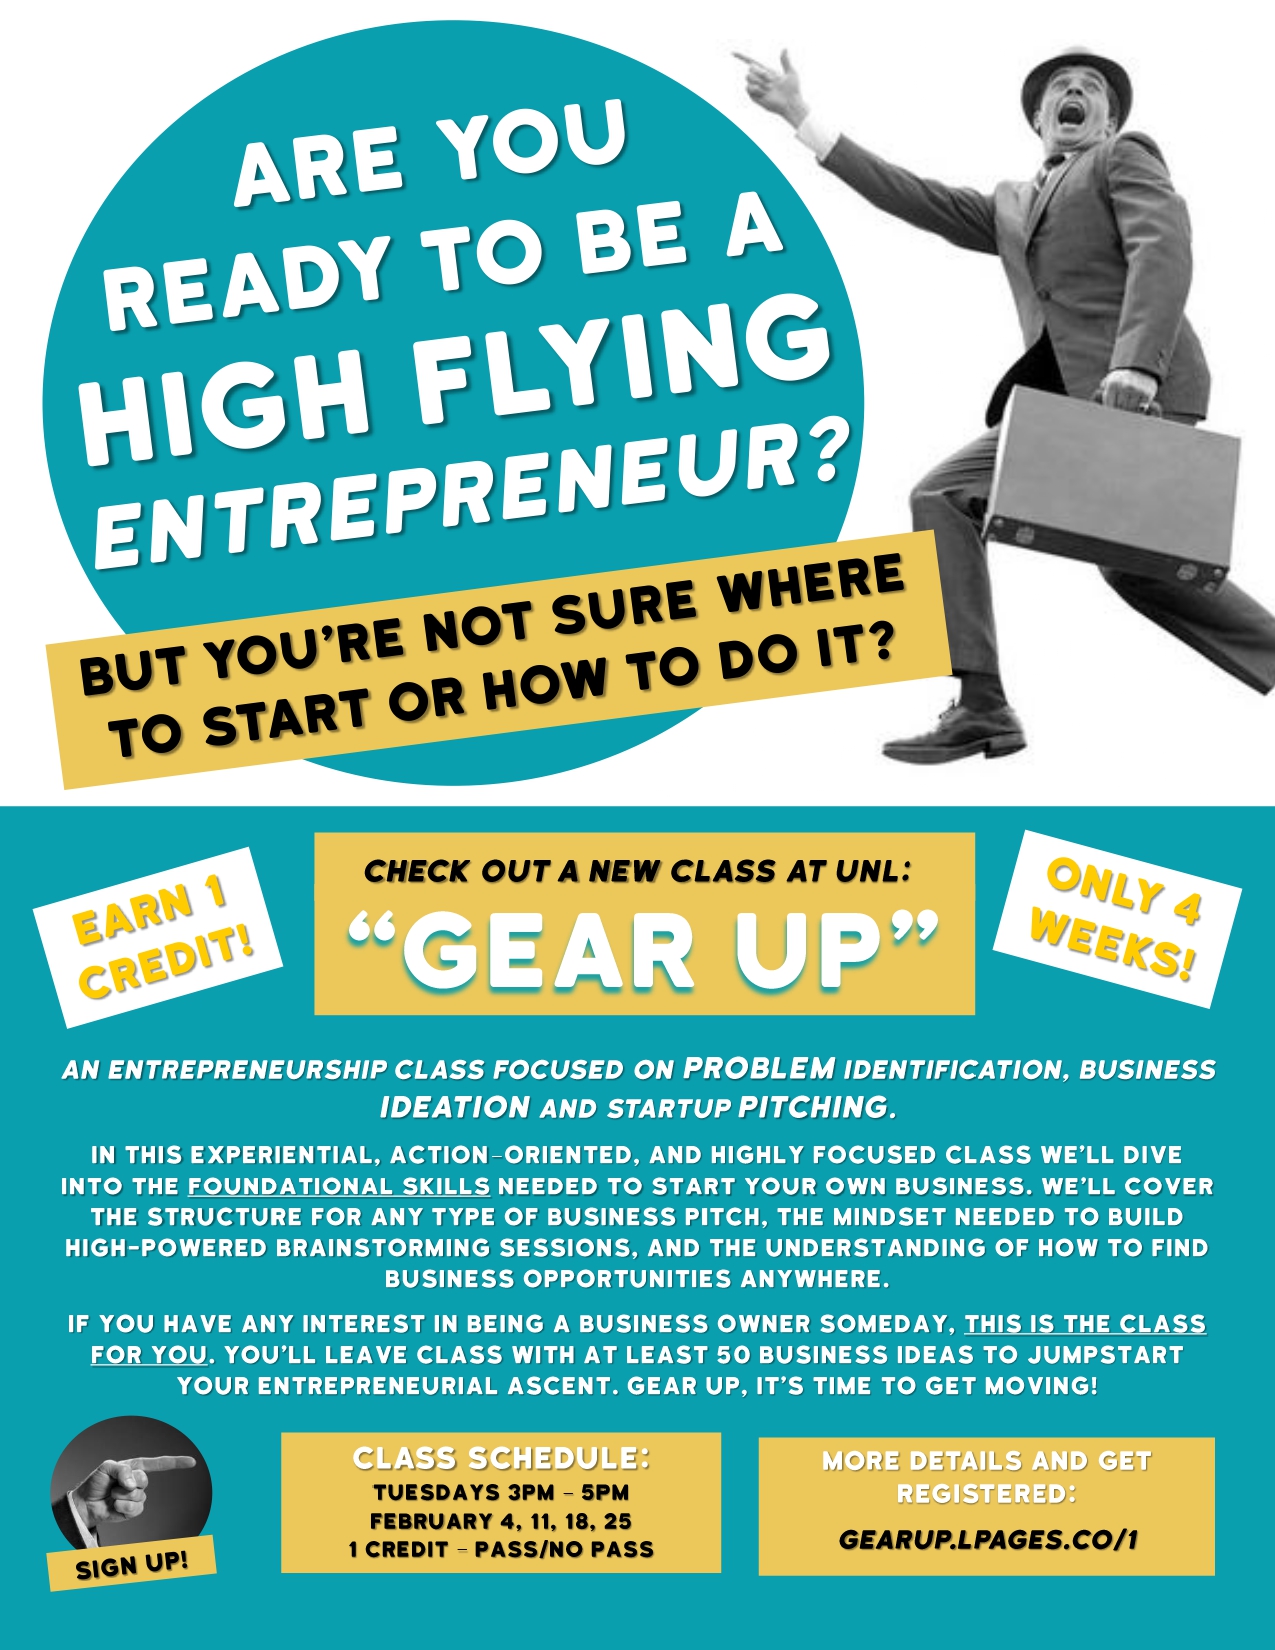 Gear-Up, a one-credit, four-week, pass/no pass class in February teaches the basics of entrepreneurship.